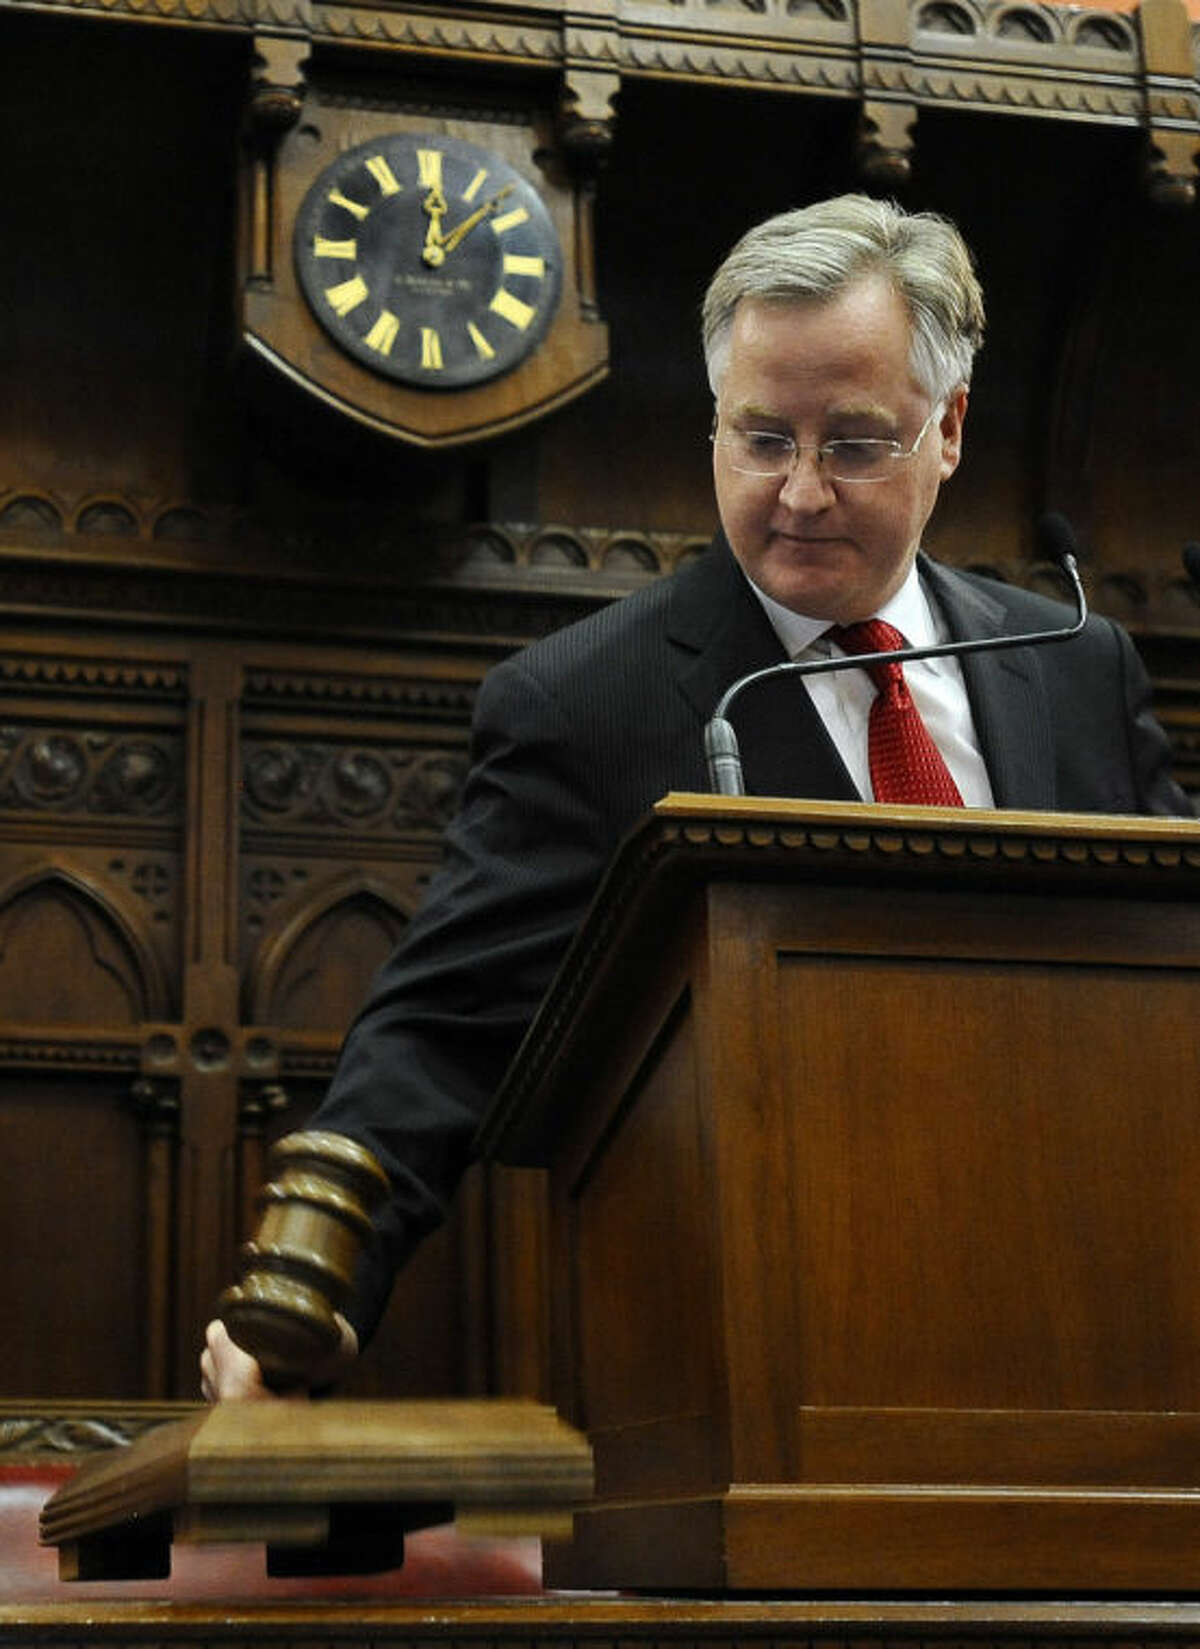 Connecticut Speaker of the House Brendan Sharkey brings down the gavel to close the final day of session at the Capitol, Thursday, May 8, 2014, in Hartford, Conn. (AP Photo/Jessica Hill)